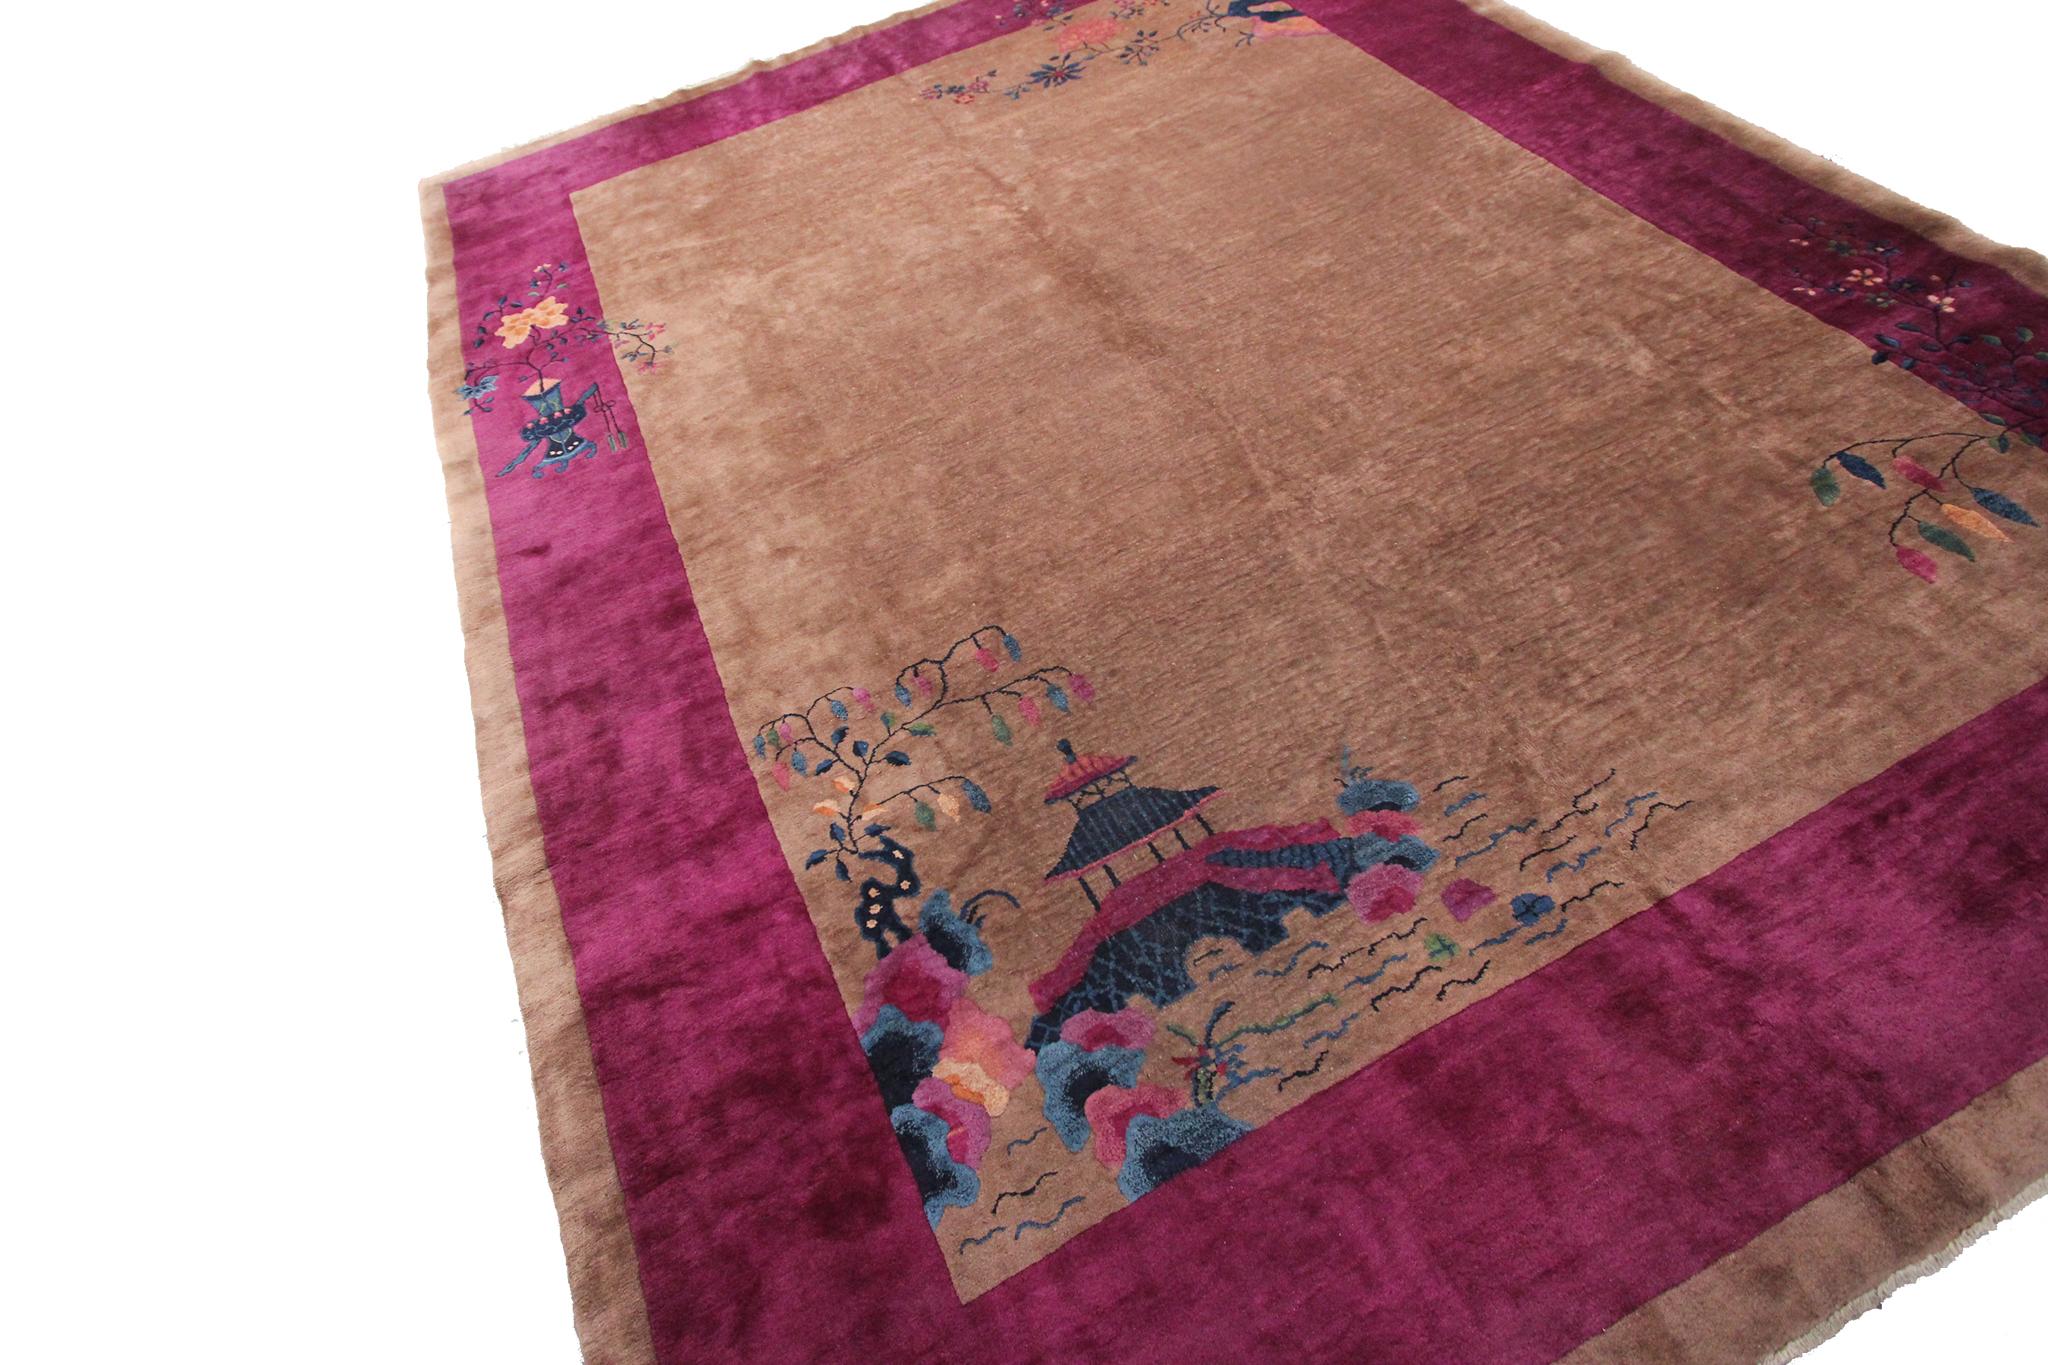 Antique Art Deco Rug Antique Chinese Walter Nichols Rug 1920 9x12 277cm x 348cm In Good Condition For Sale In New York, NY